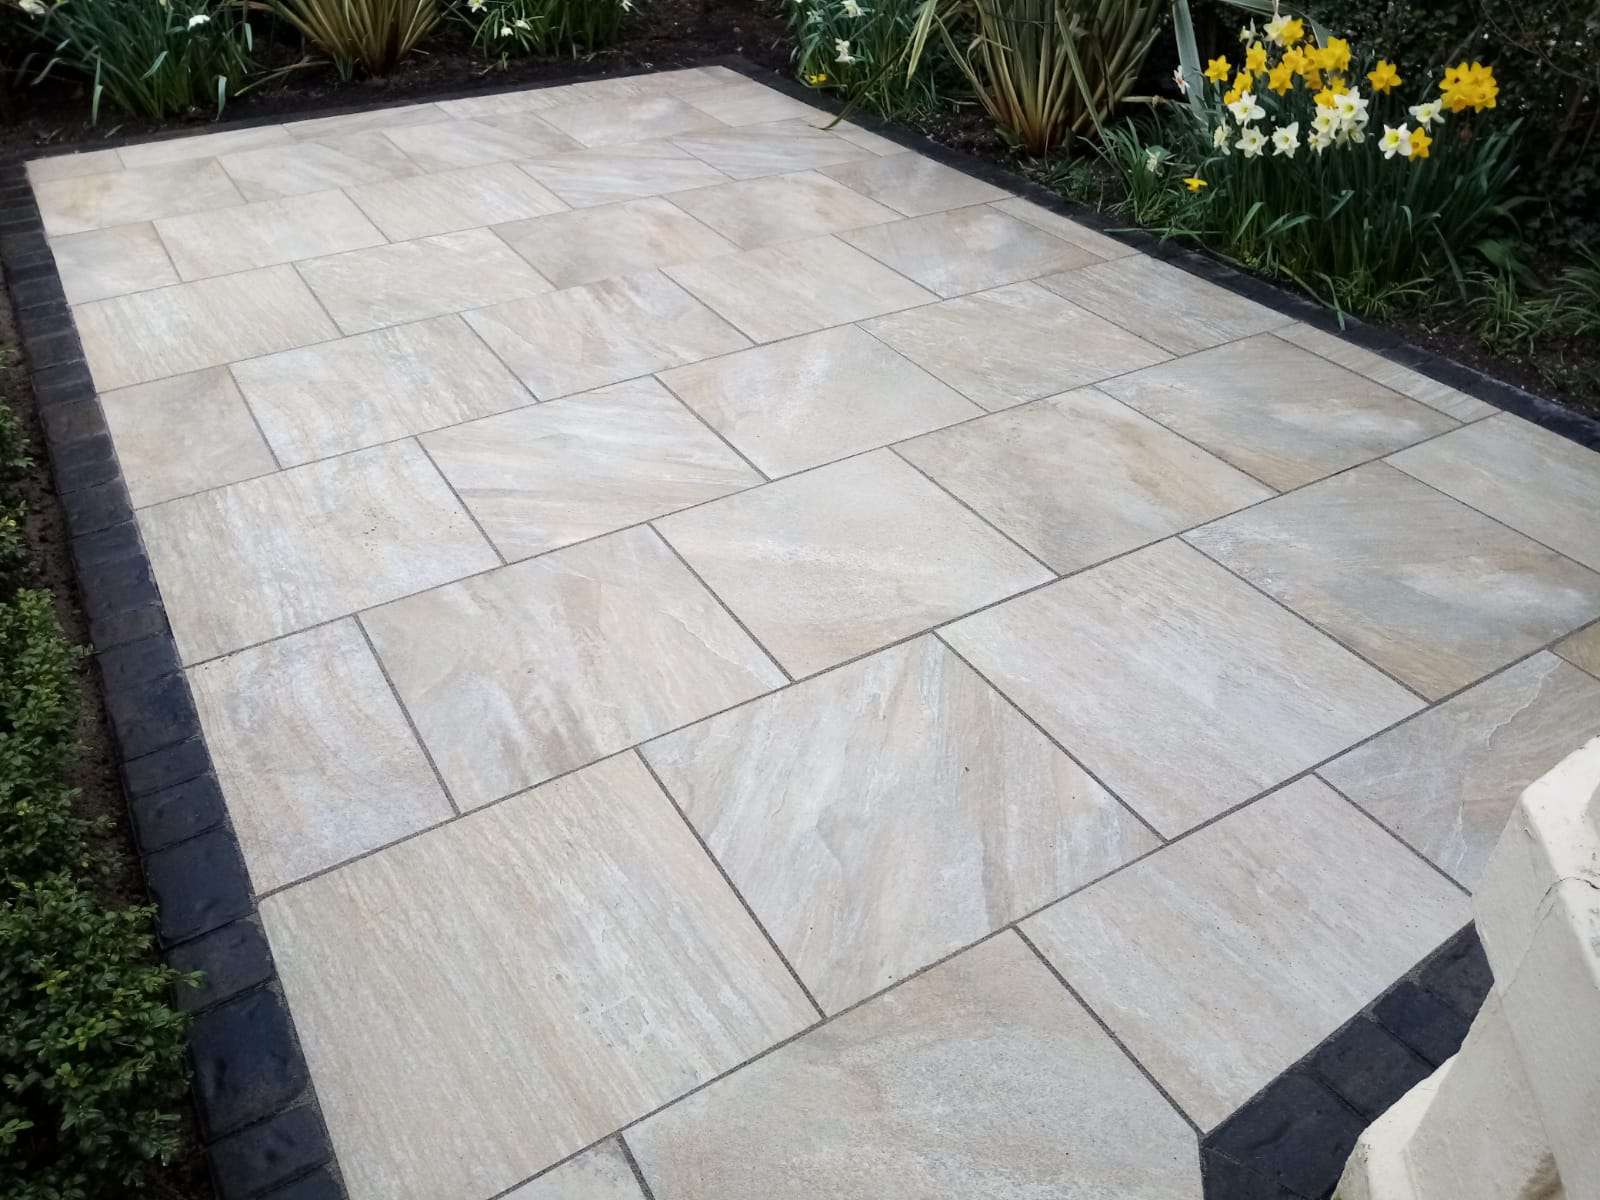 Images Gosforth Paving Solutions